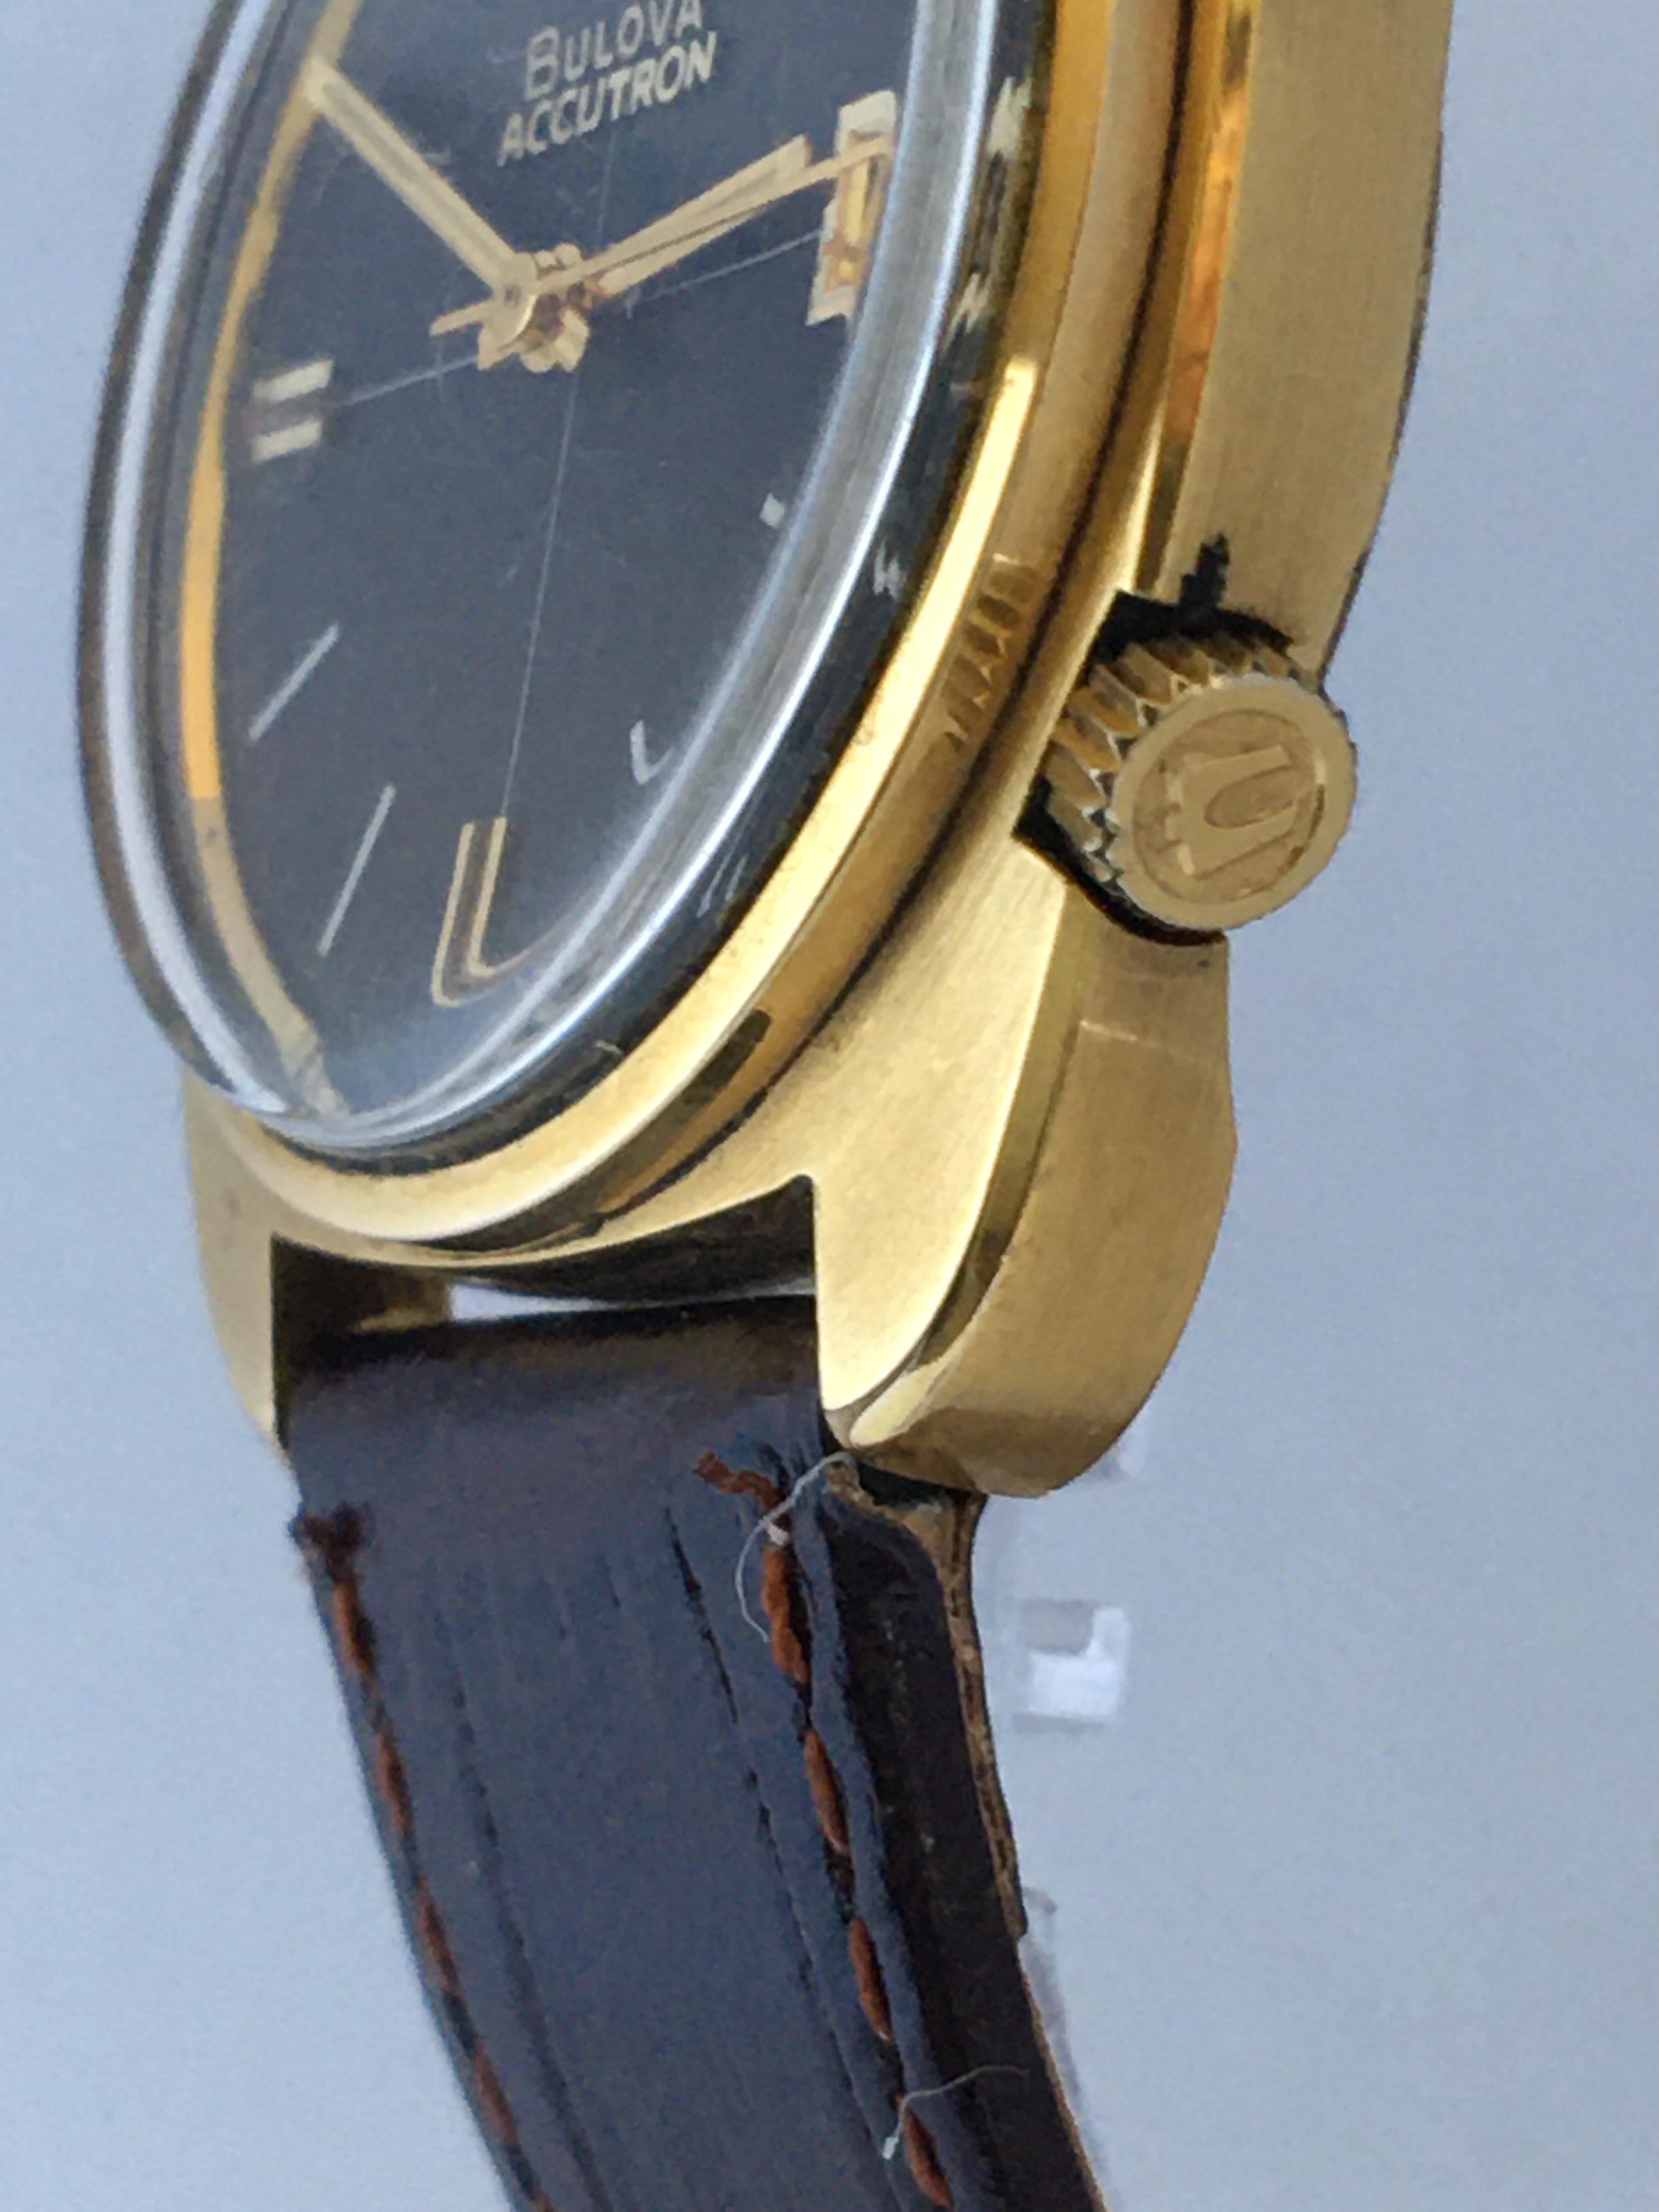 Vintage 1970s Gold-Plated Bulova Accutron Gent Watch 5